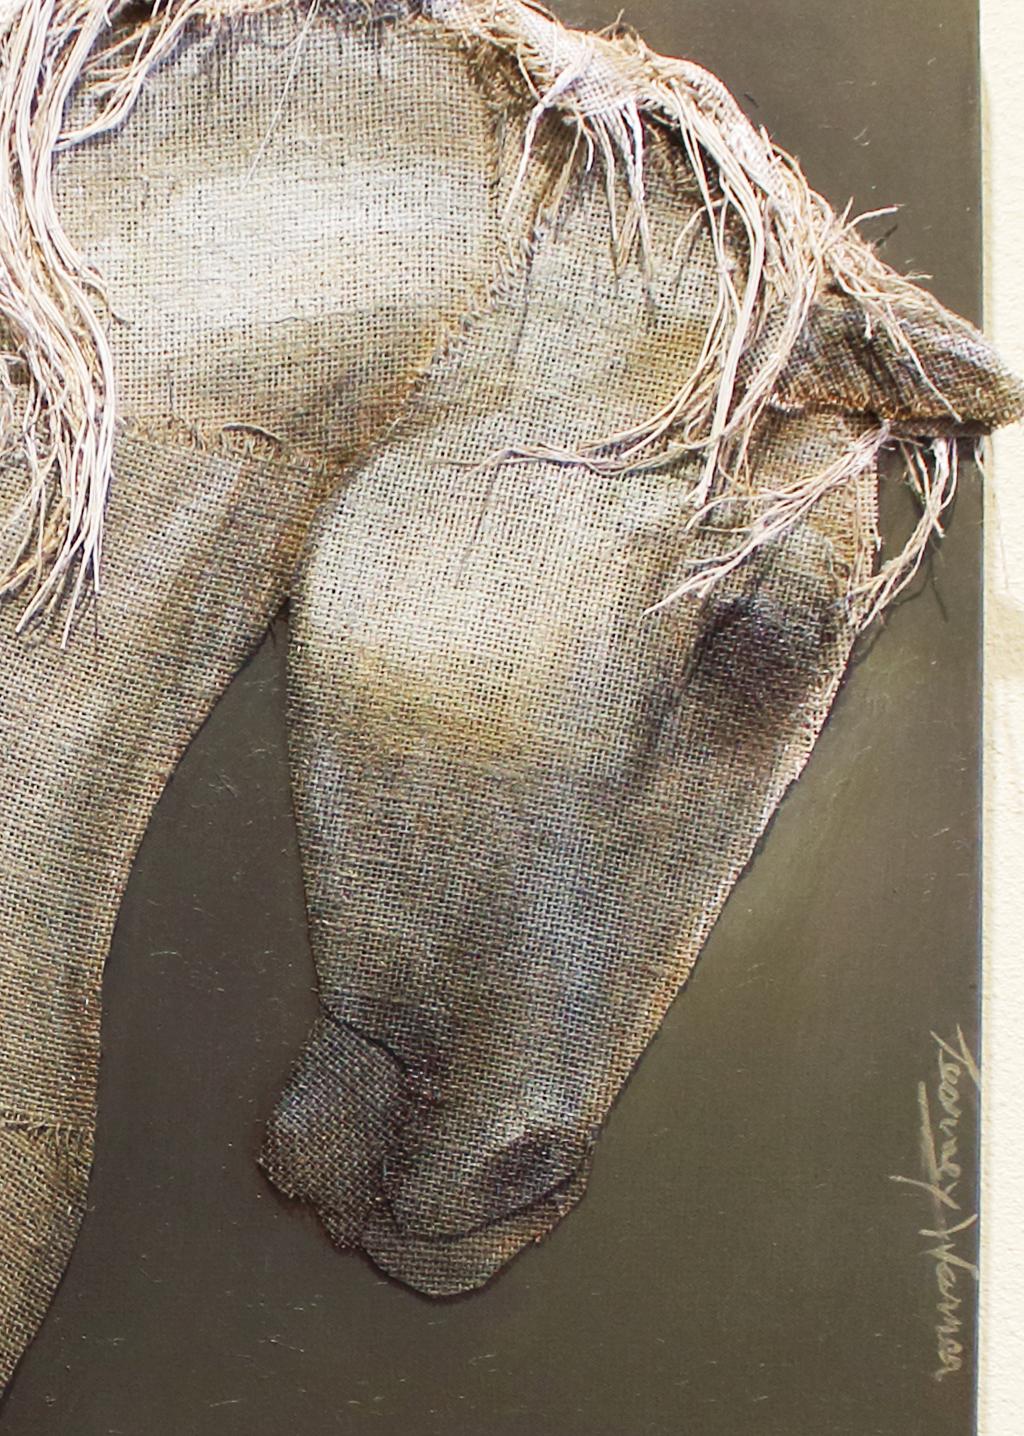 EQUUS, Horse - Painting by Loretta Tearney Warner